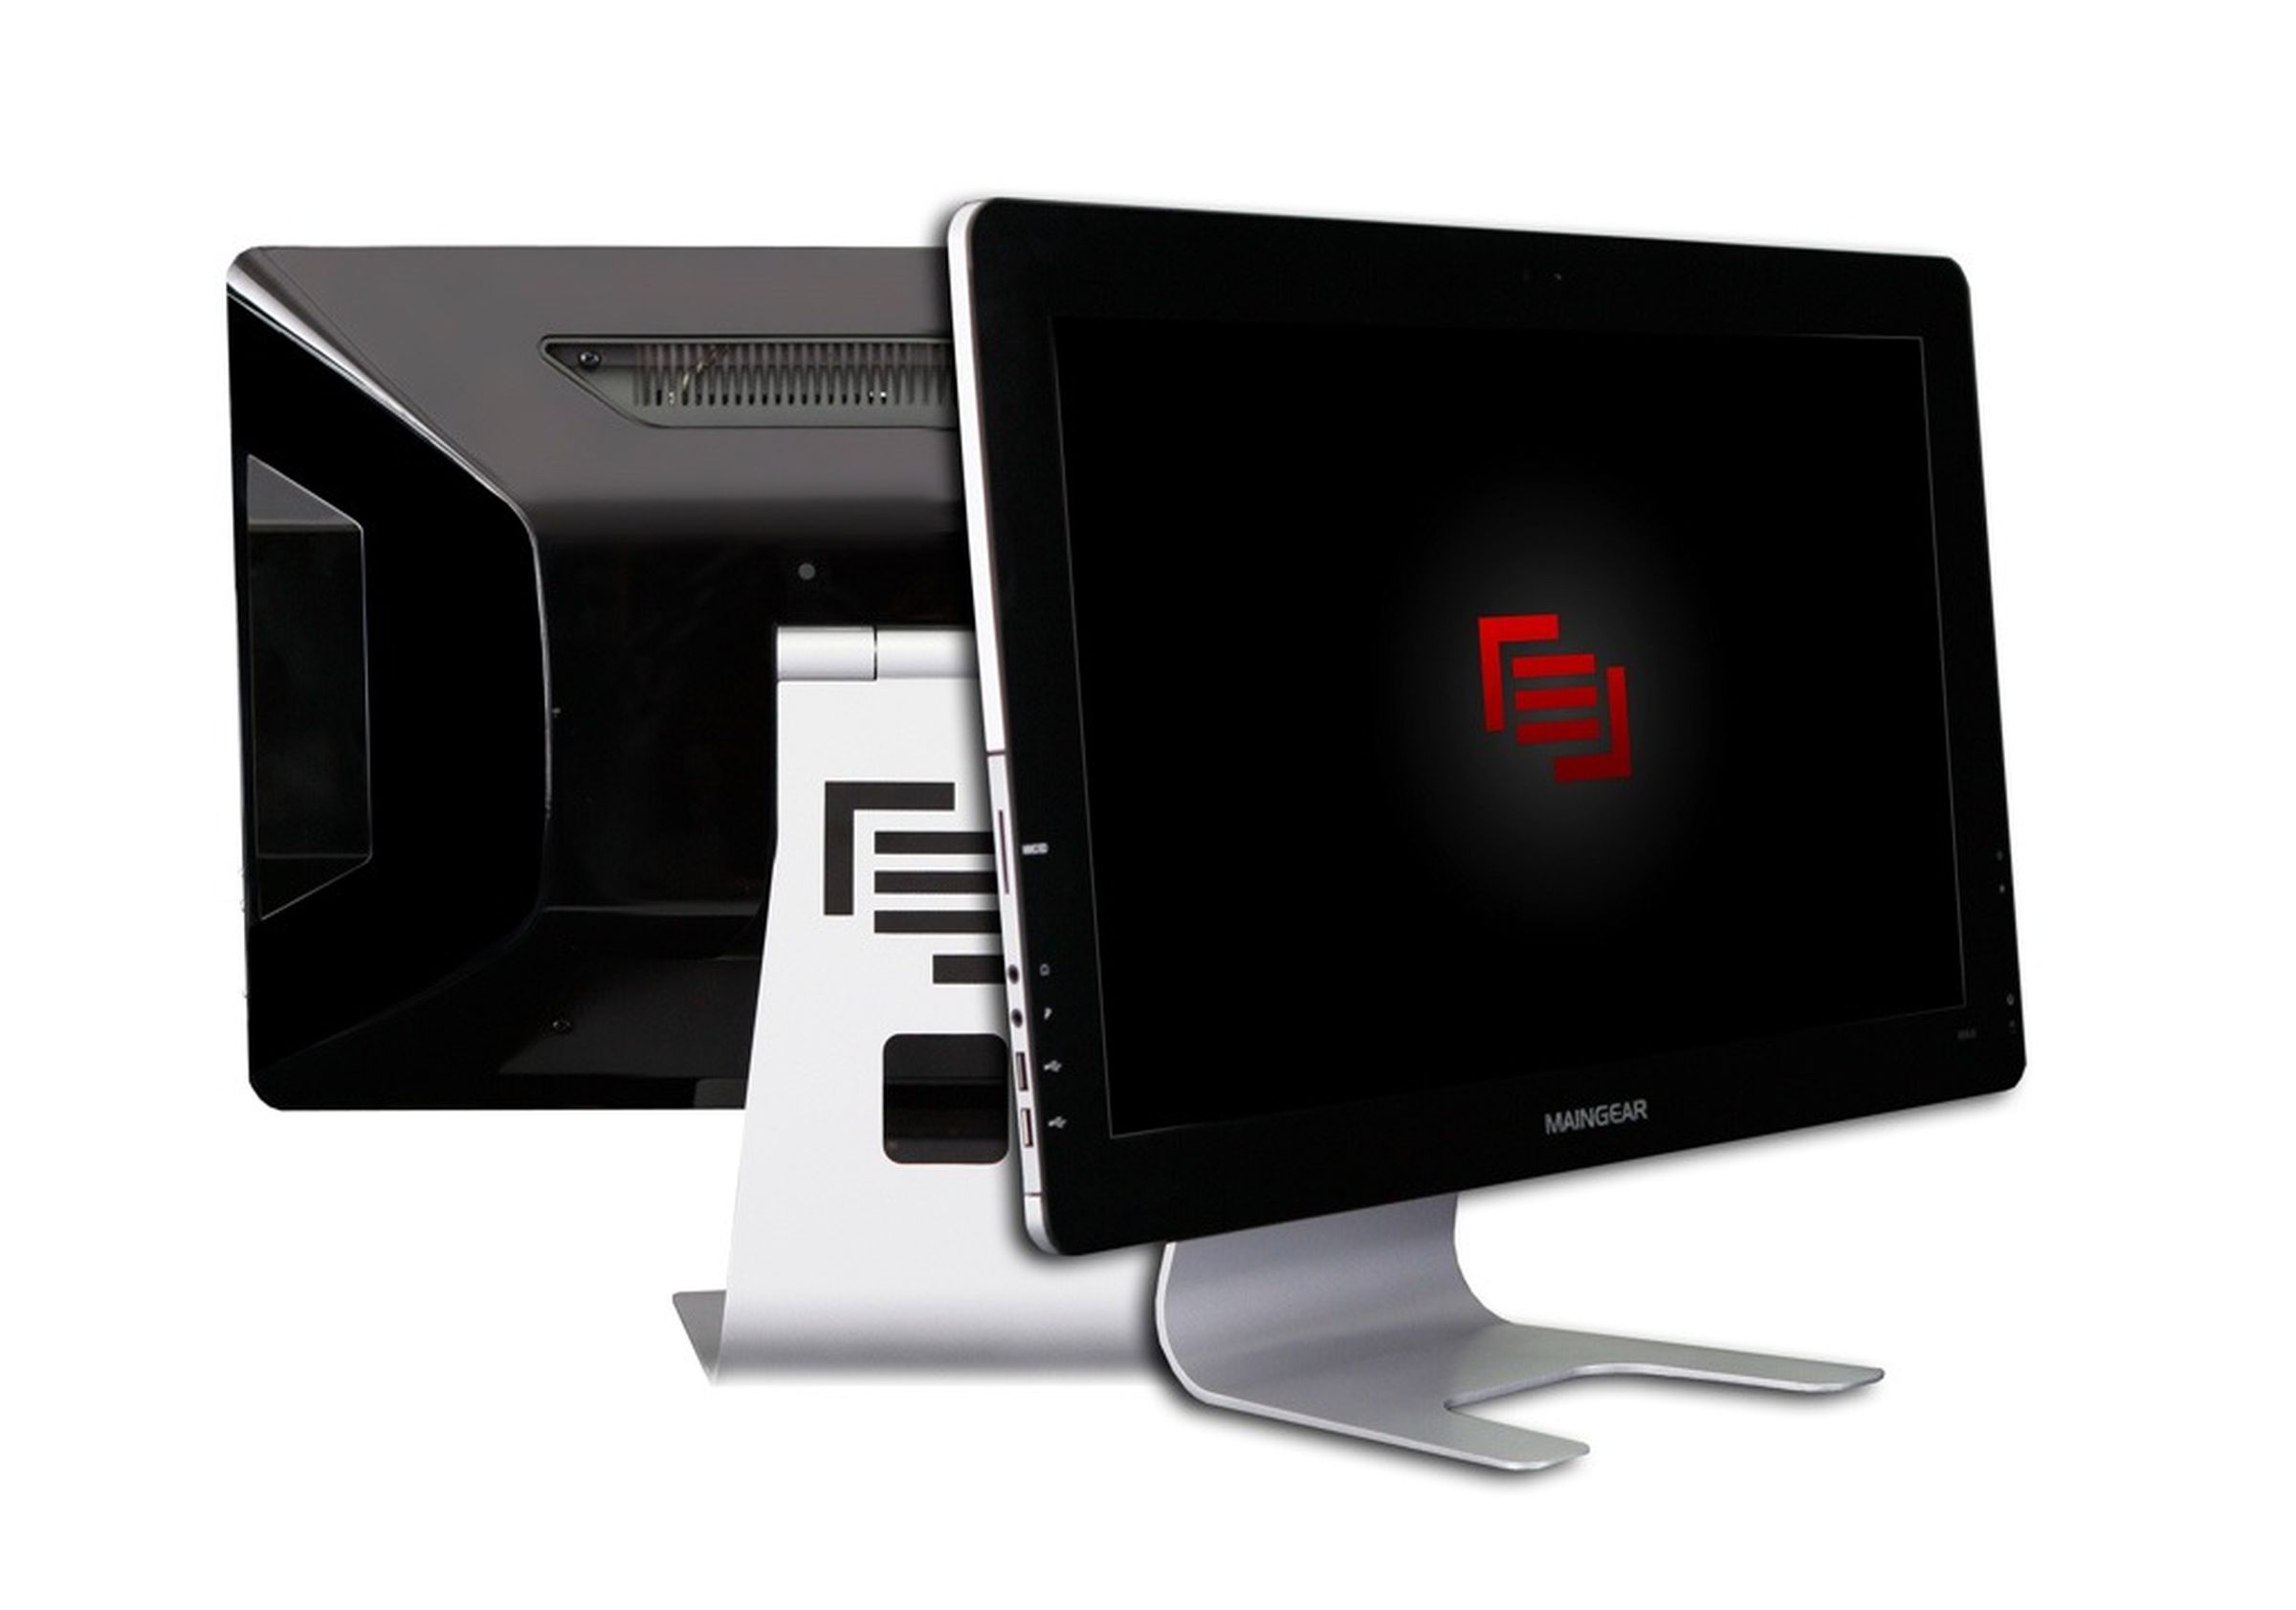 Maingear Solo 21 all-in-one PC official photos